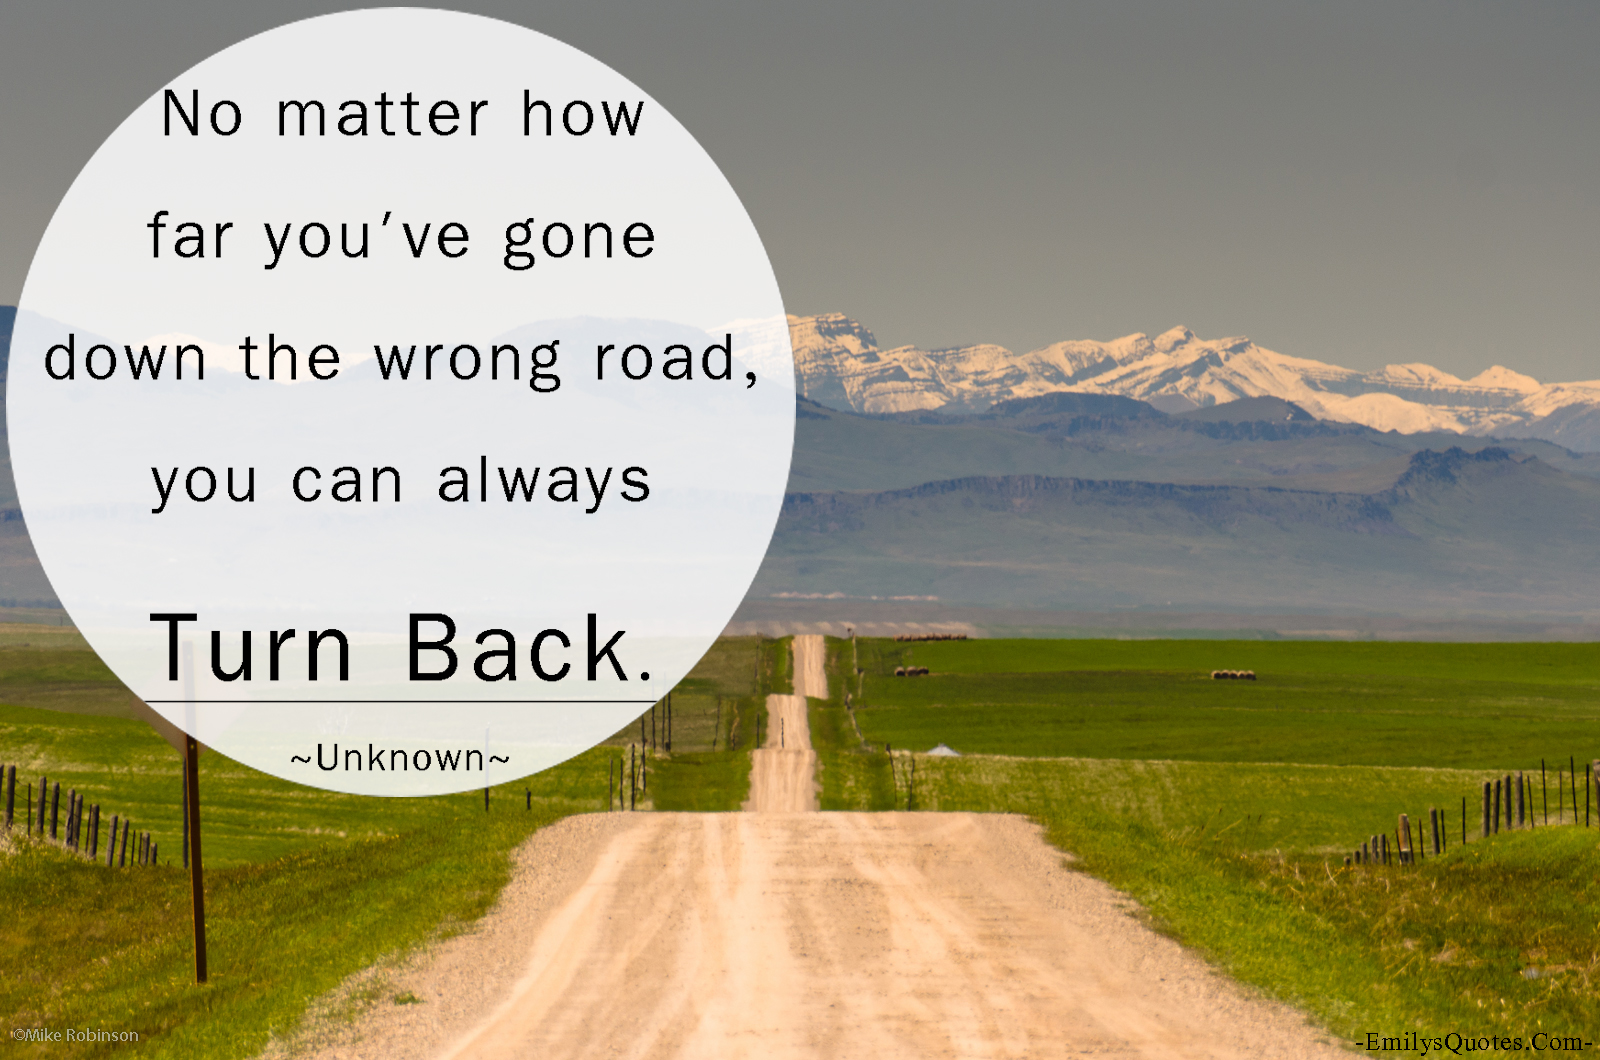 No matter how far you’ve gone down the wrong road, you can always turn back